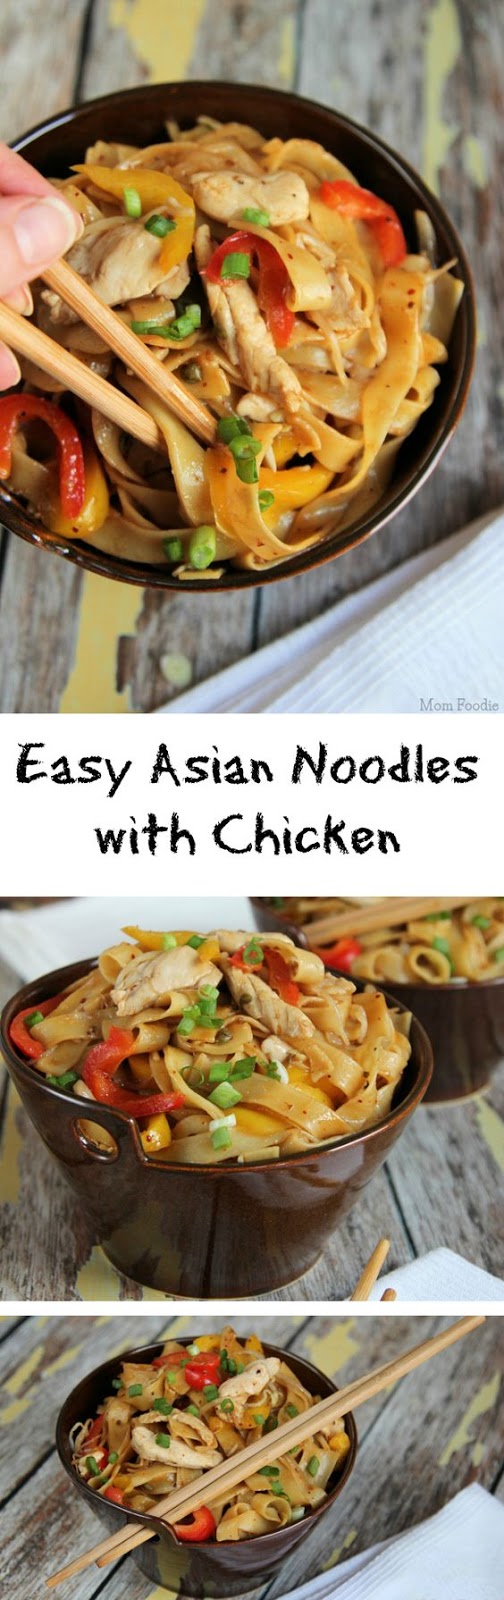 Asian Noodles with Chicken and Vegetables Recipe – Home Inspiration and